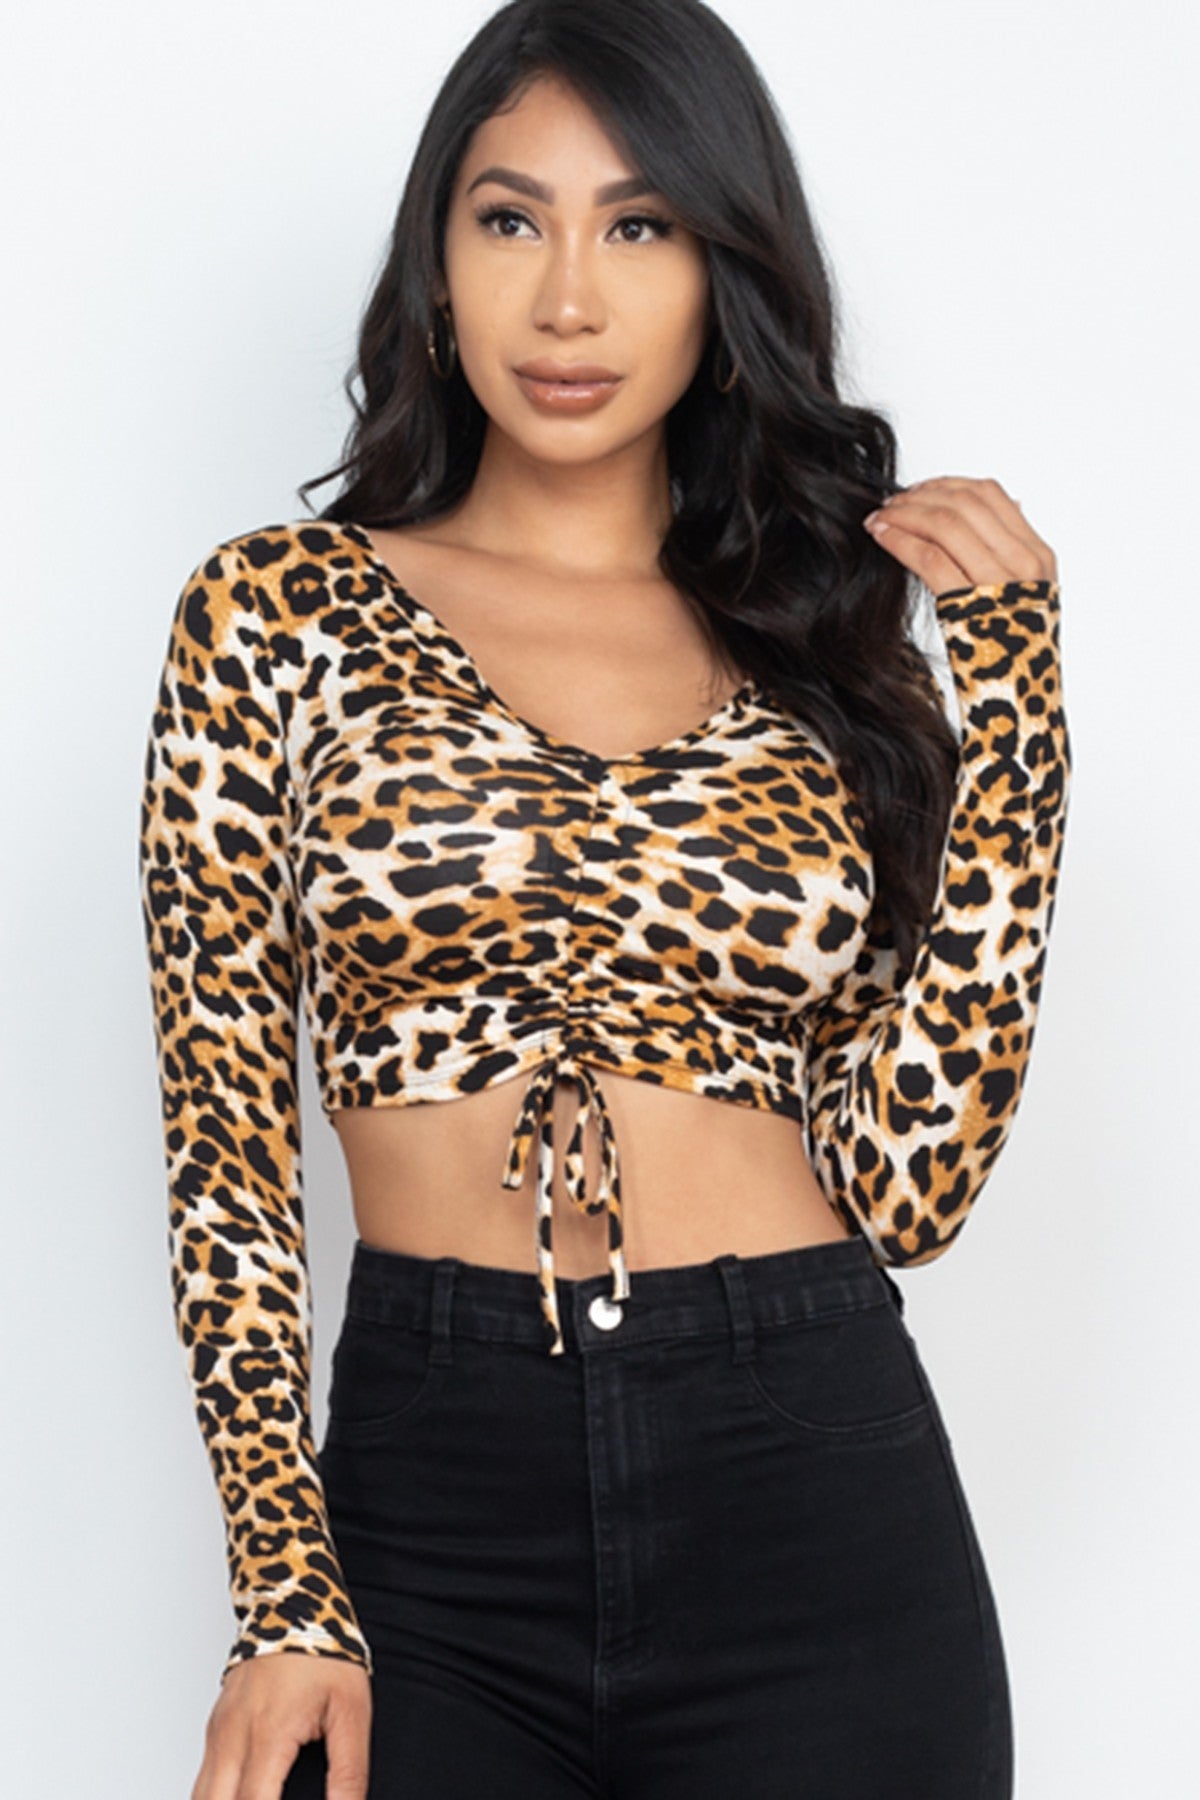 Leopard Print Ruched Crop Top with Front Straps - Shopping Therapy, LLC Apparel & Accessories